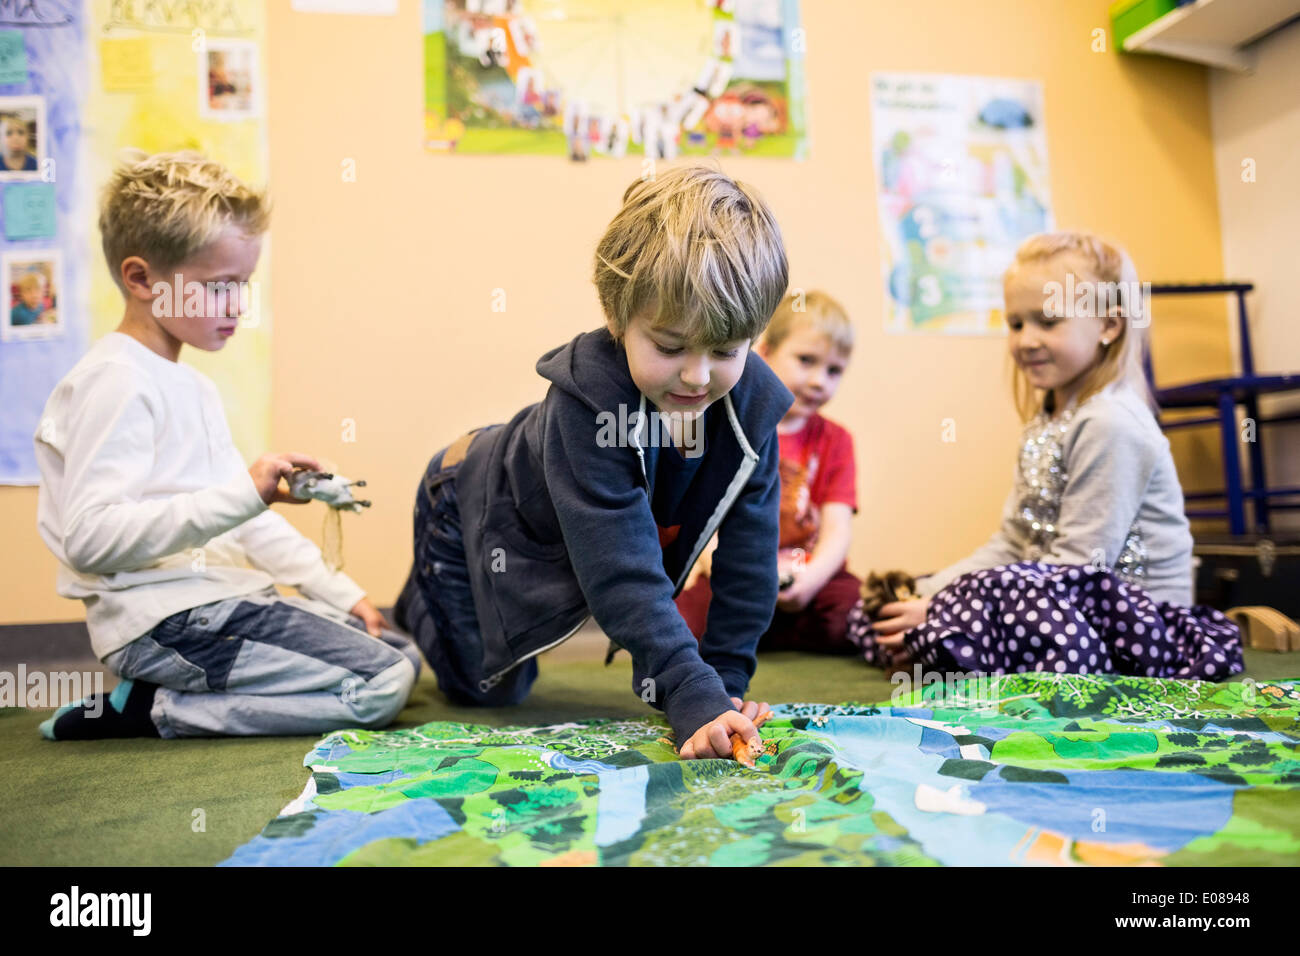 Elementary students playing in kindergarten Stock Photo